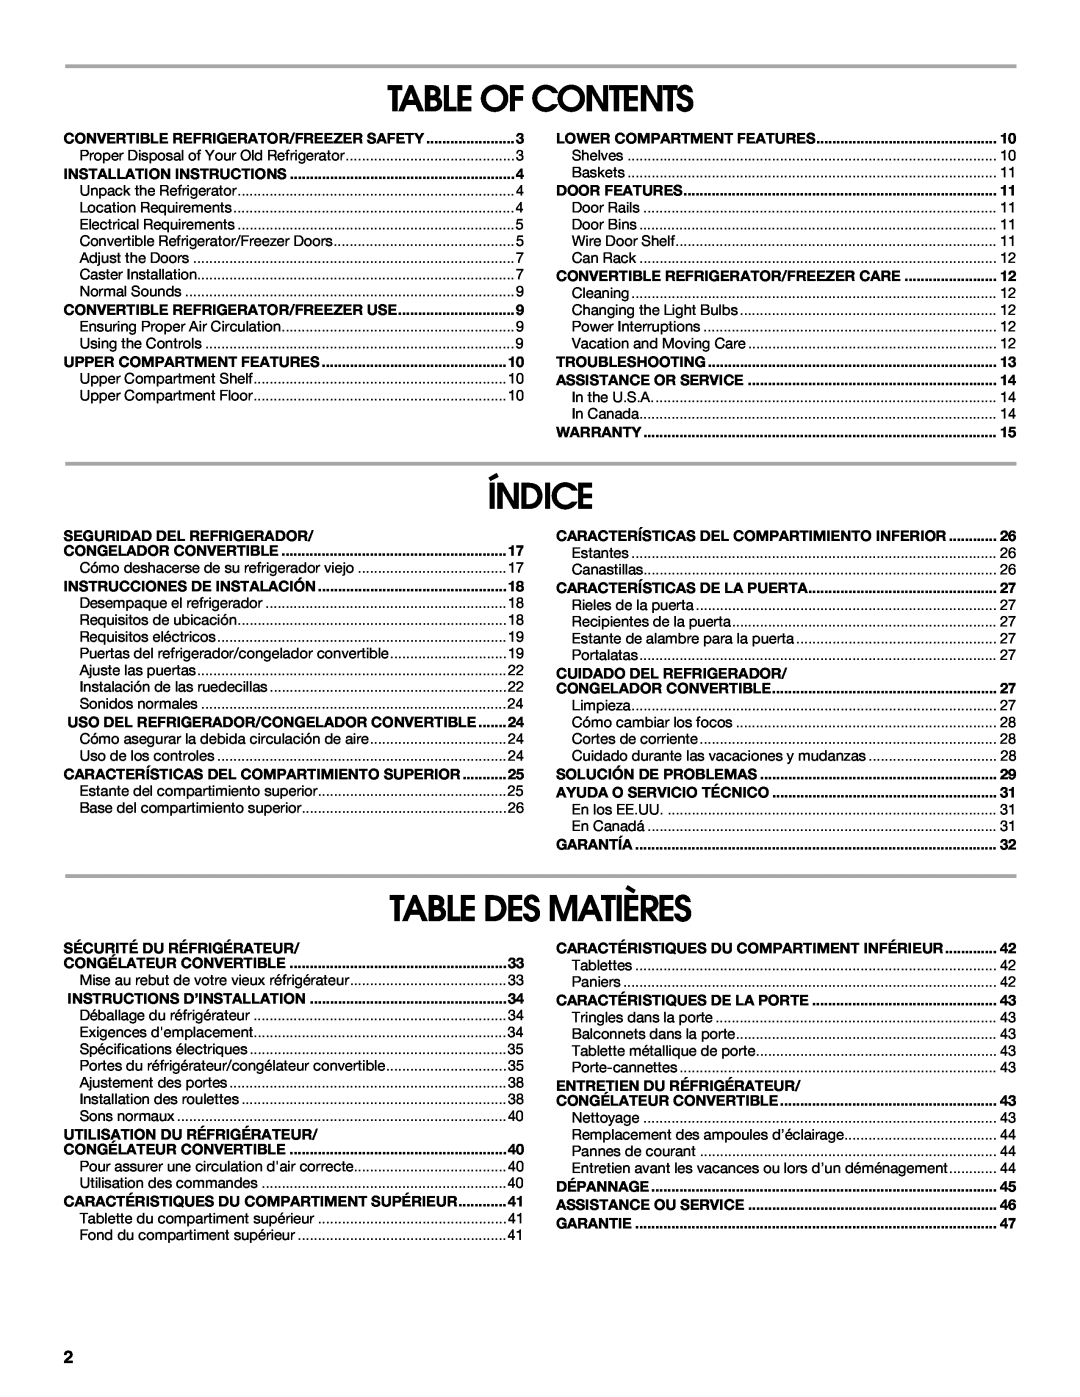 Whirlpool 2314466 manual Table Of Contents, Índice, Table Des Matières 